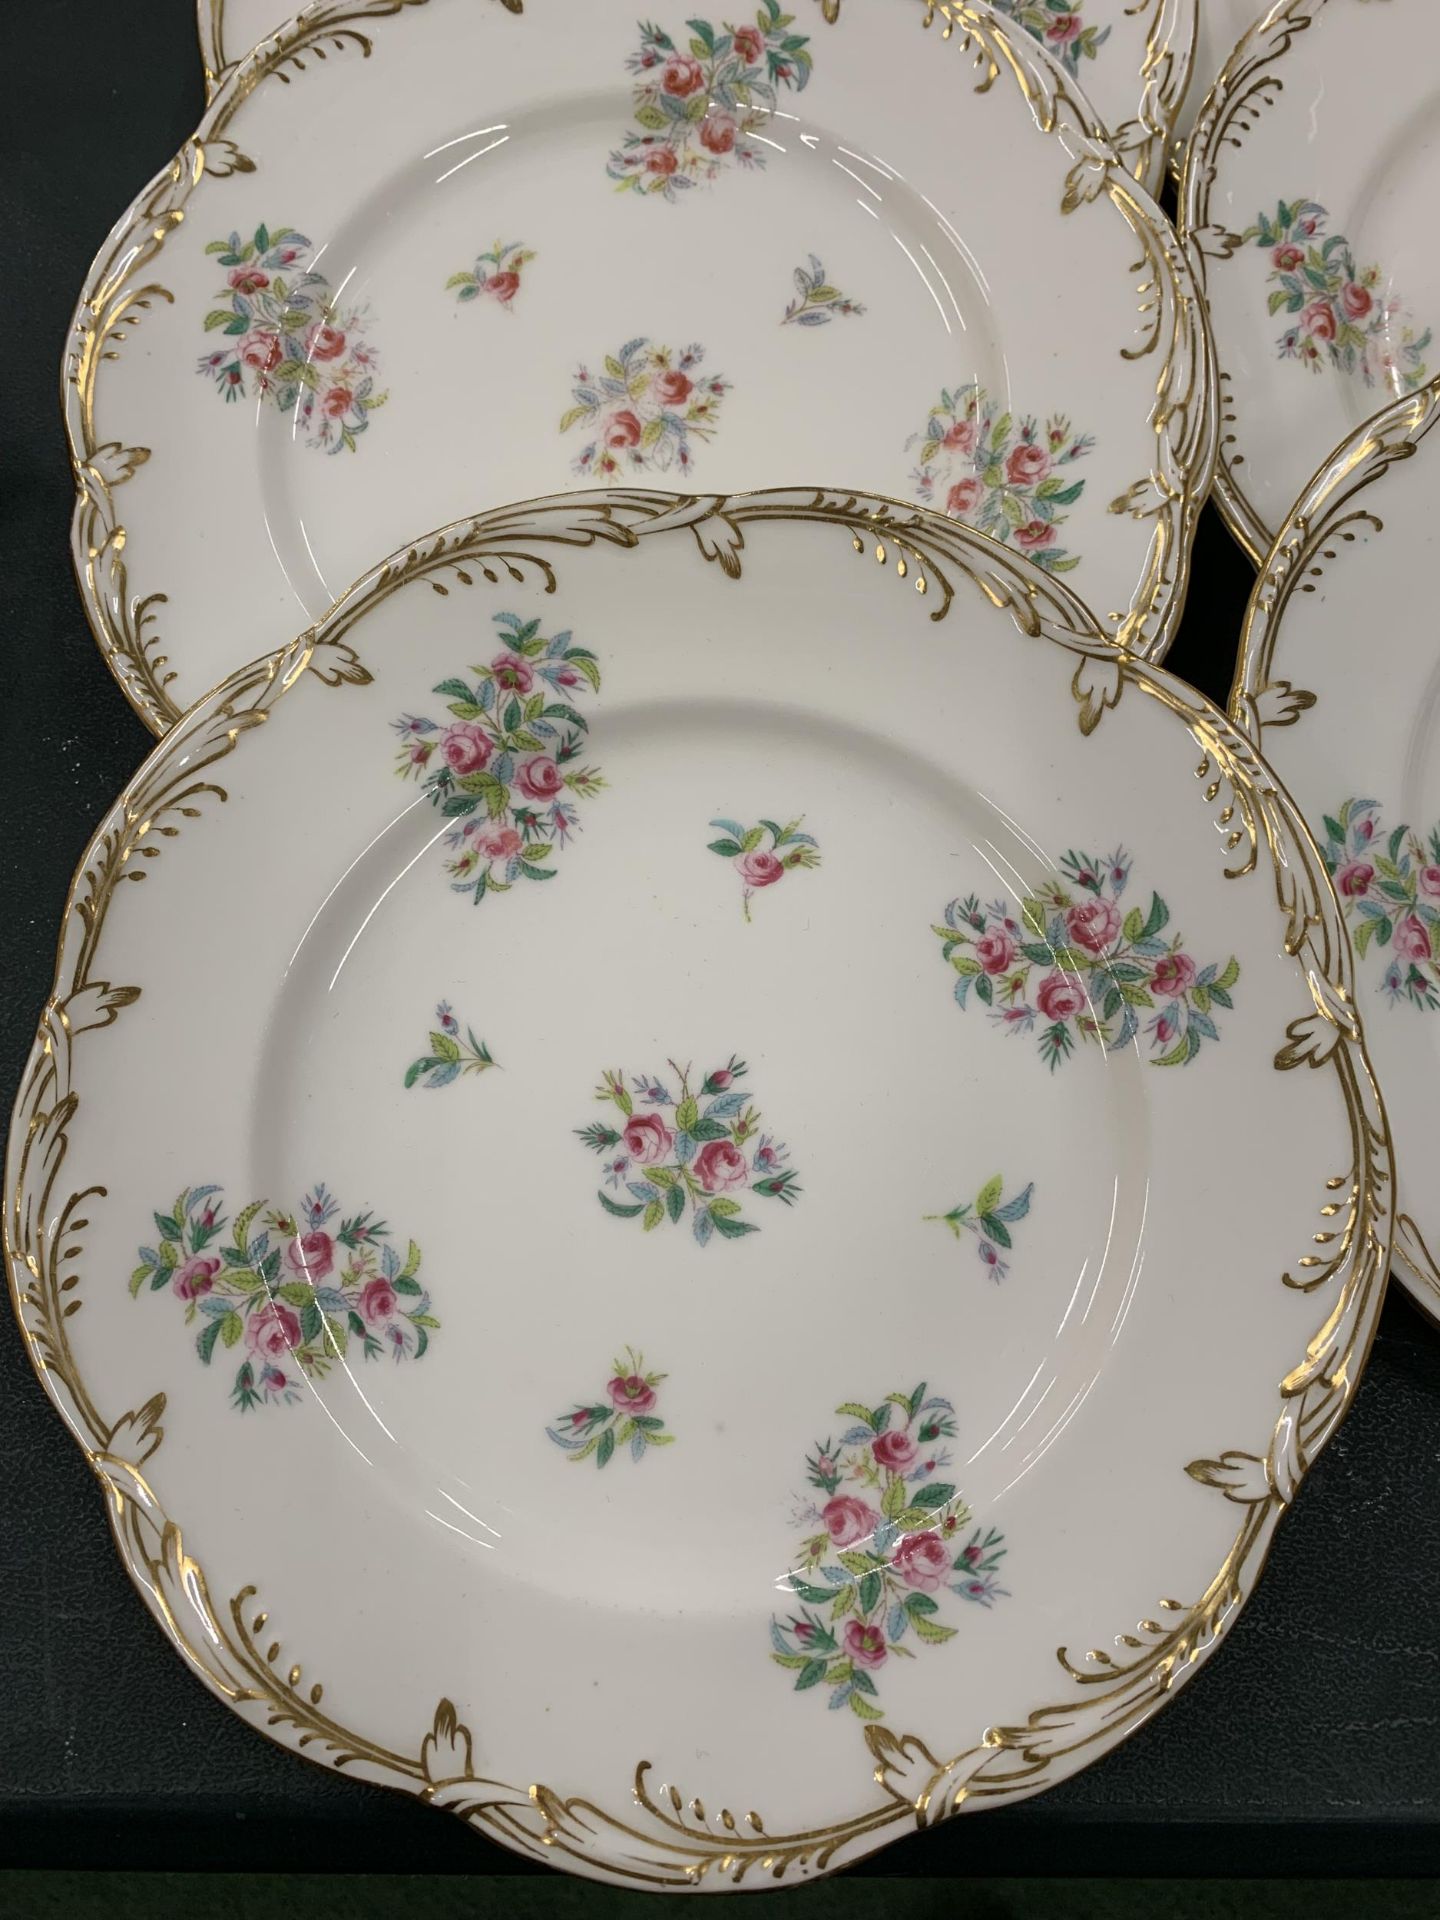 A QUANTITY OF HANDPAINTED CABINET PLATES DWITH FLORAL DESIGN AND GILT EDGES - Image 2 of 3